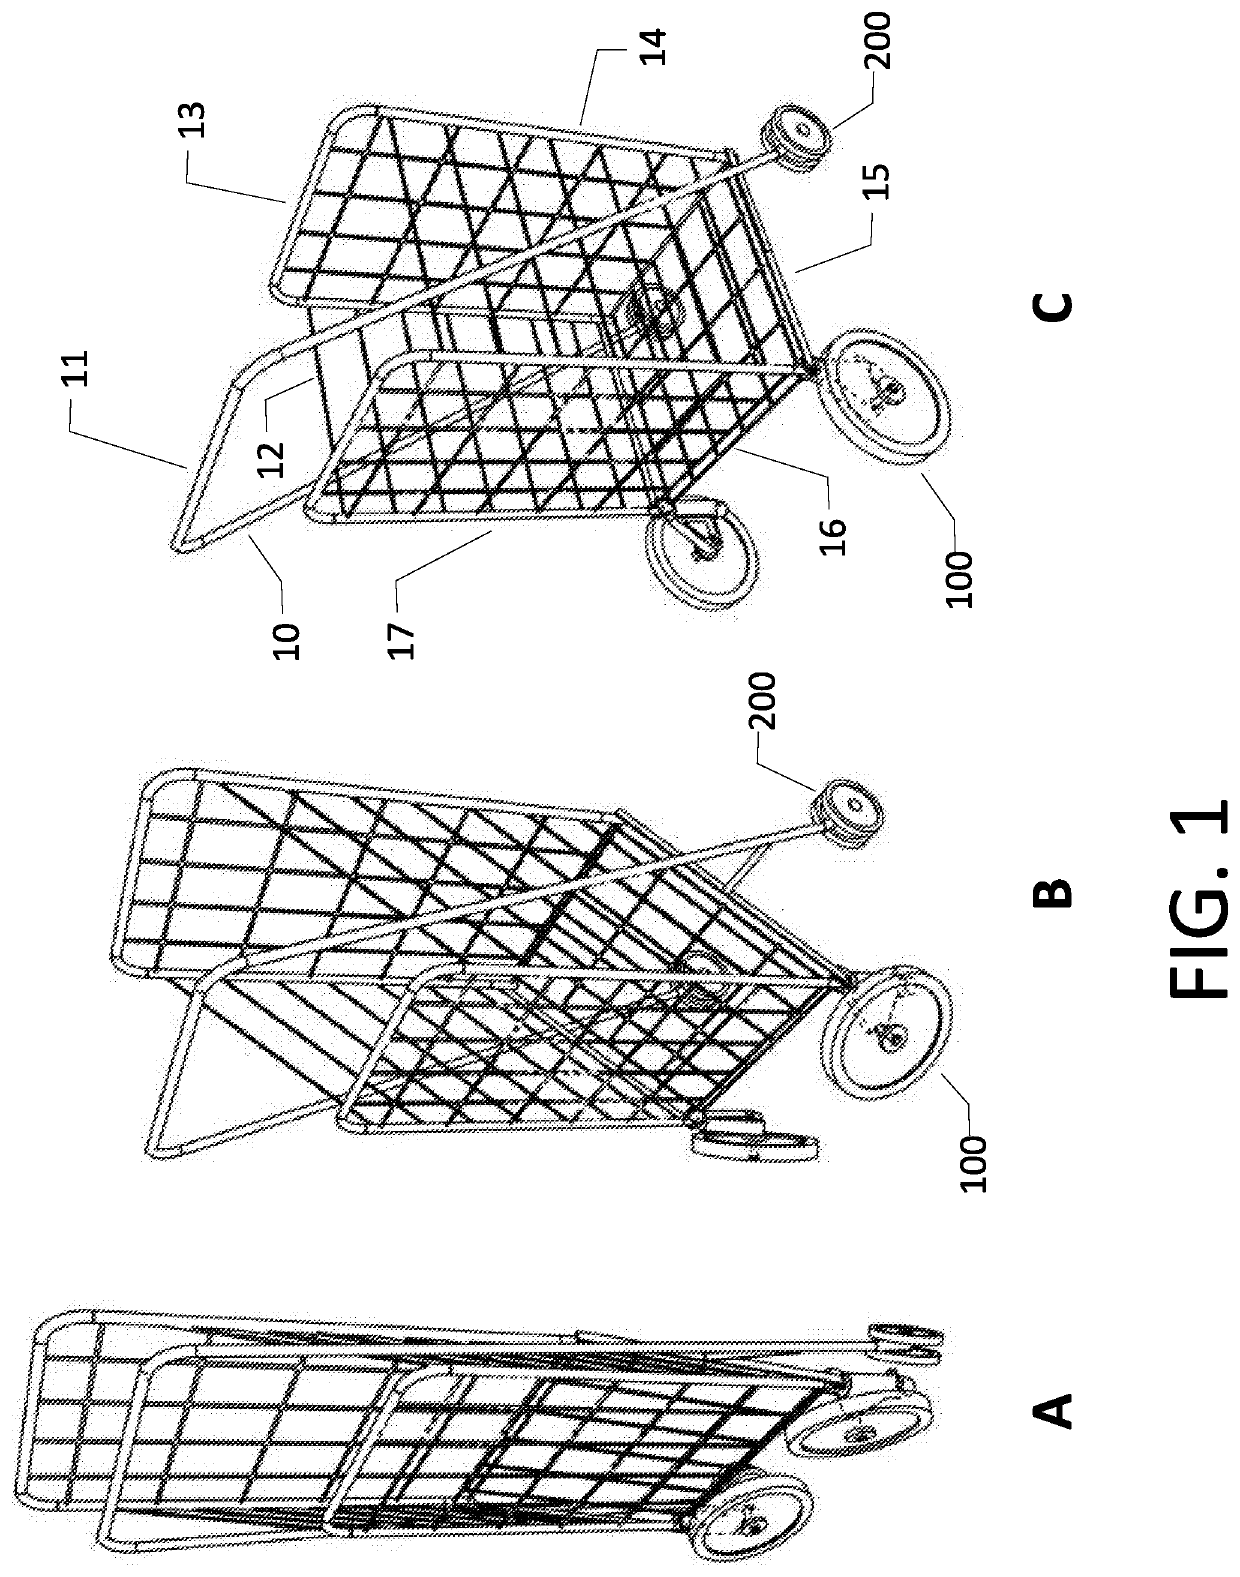 Foldable cart with deployable wheels